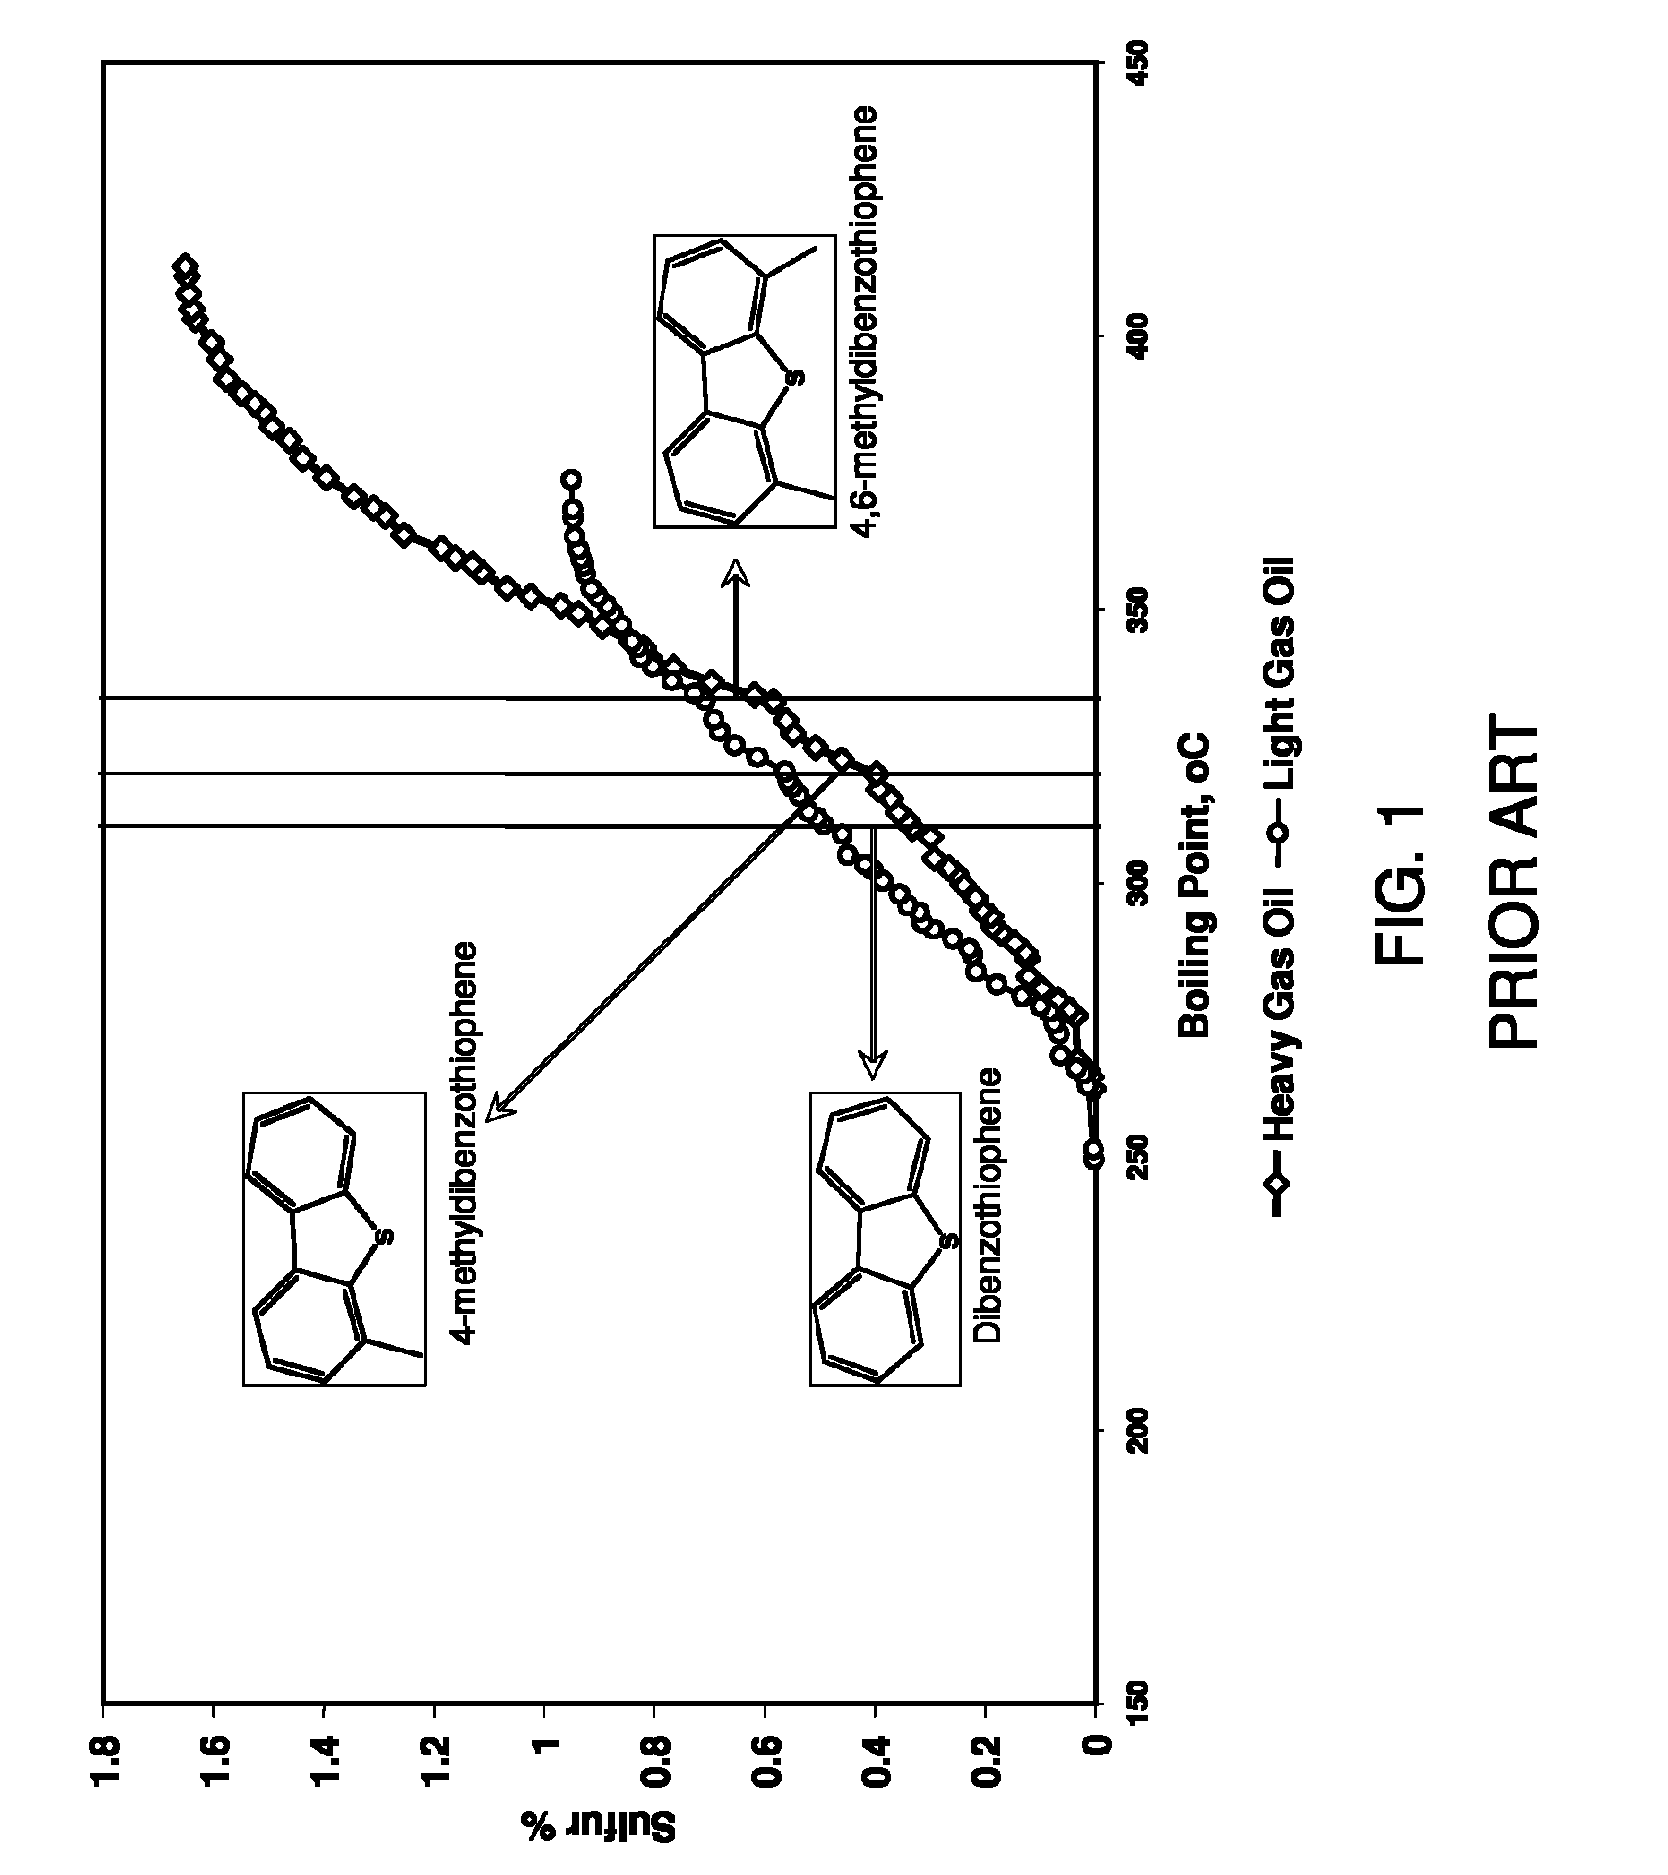 Targeted desulfurization process and apparatus integrating oxidative  desulfurization and hydrodesulfurization to produce diesel fuel having an ultra-low level of organosulfur compounds